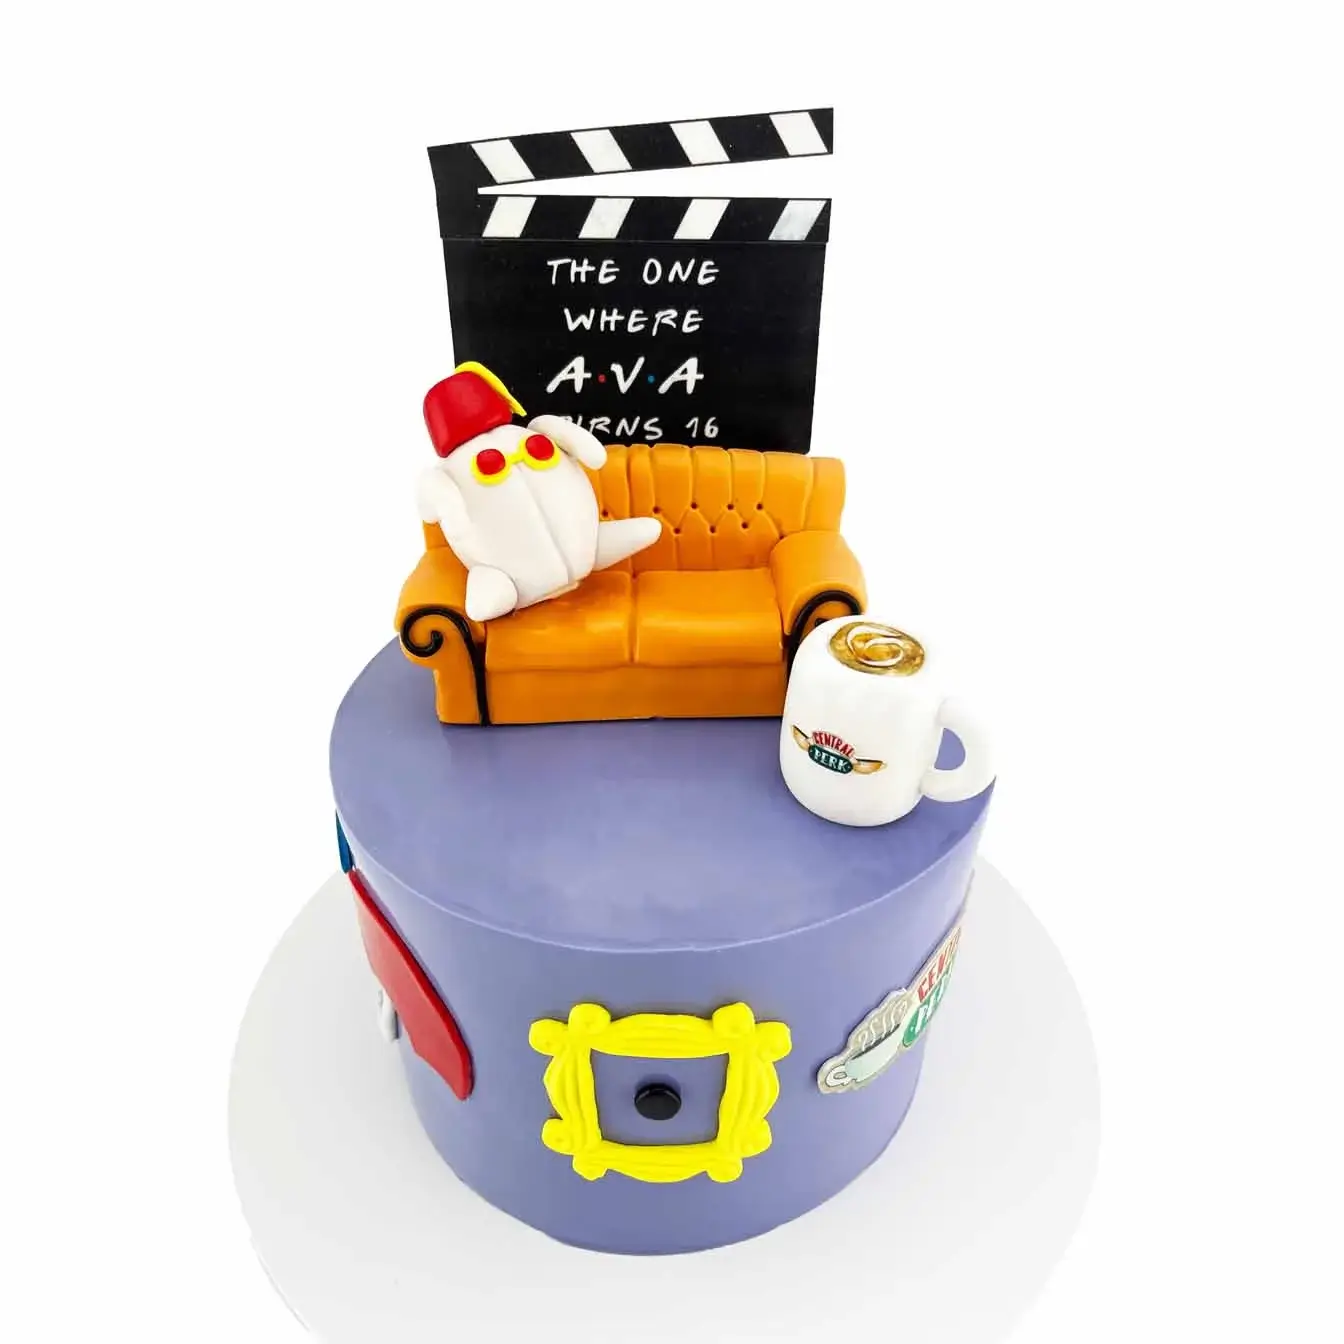 Friends-themed cake featuring a fondant replica of the iconic Friends couch, personalized clapper board, Central Perk mug, friends peep hole, and umbrellas - perfect for any celebration